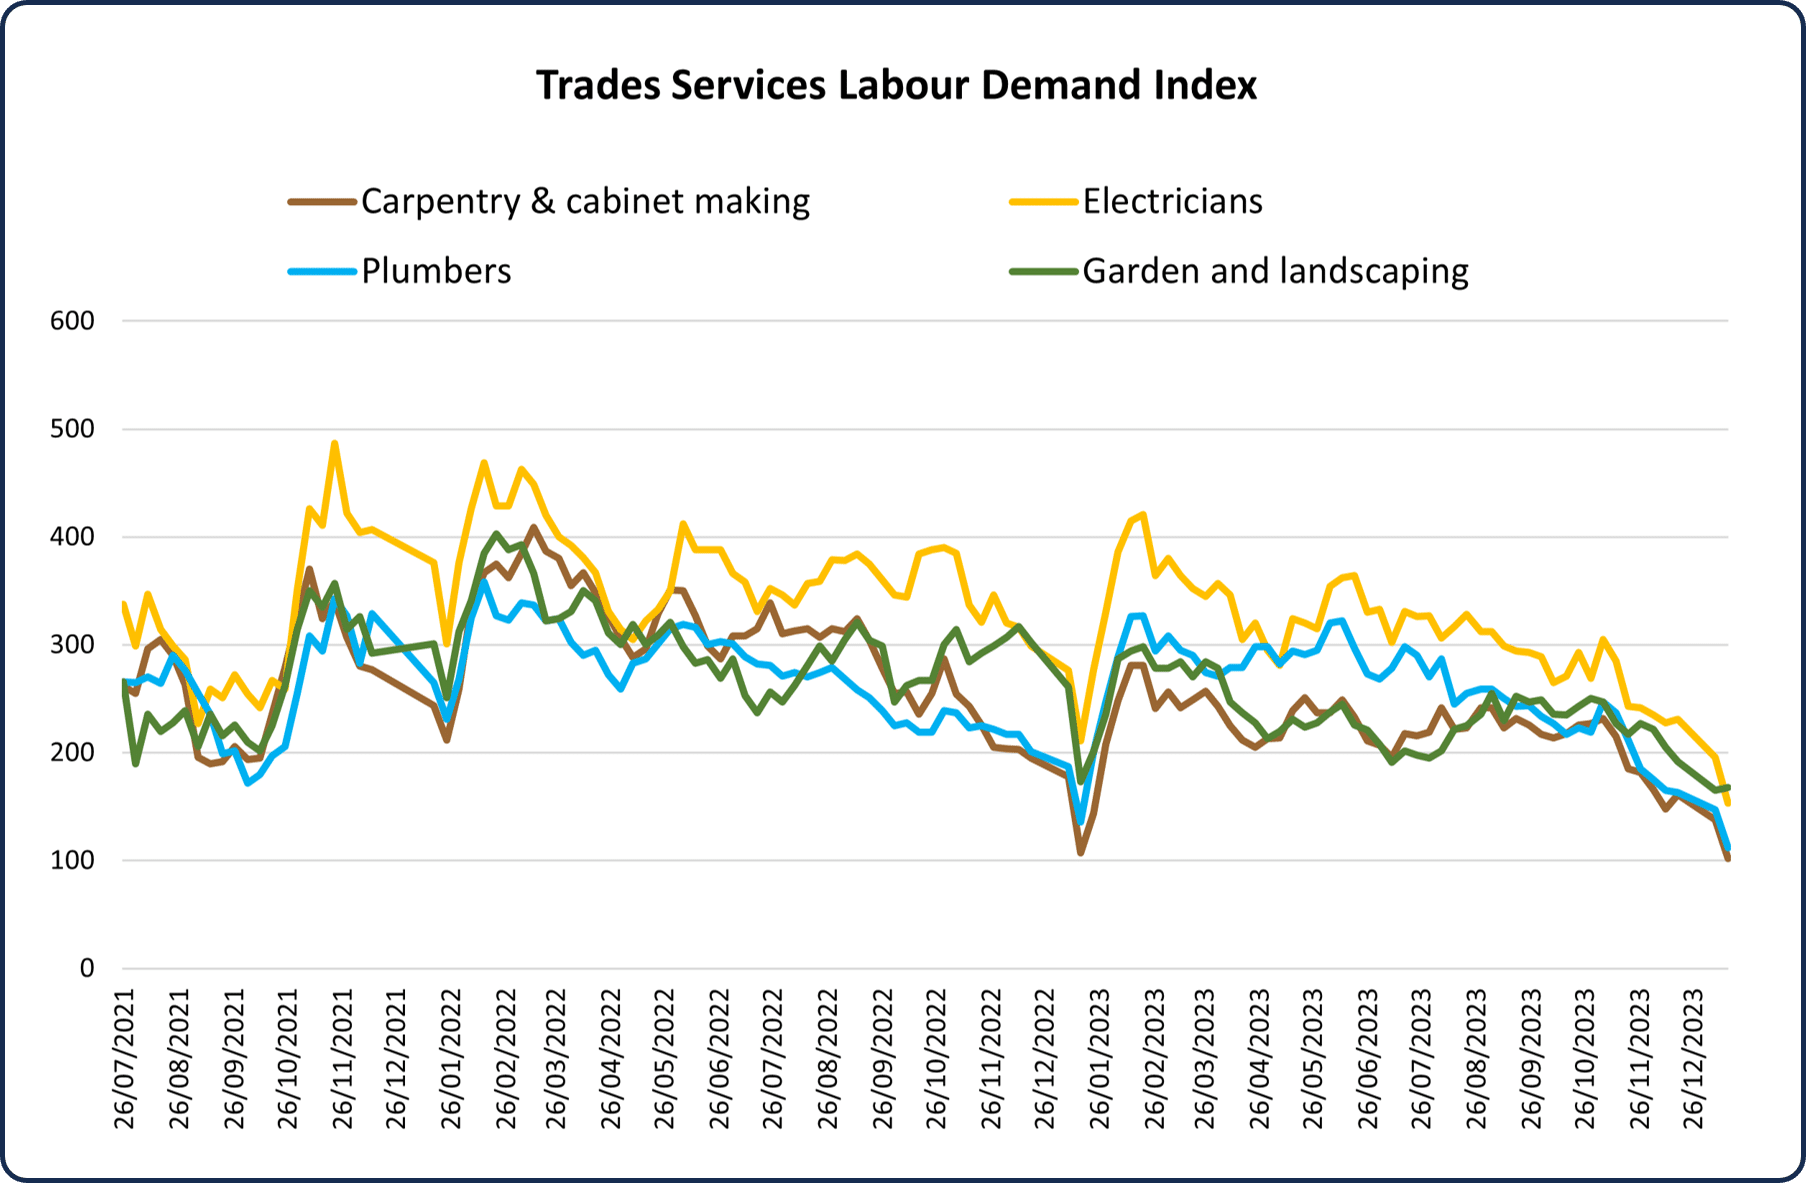 Chart of labour demand in the Australian trades sector